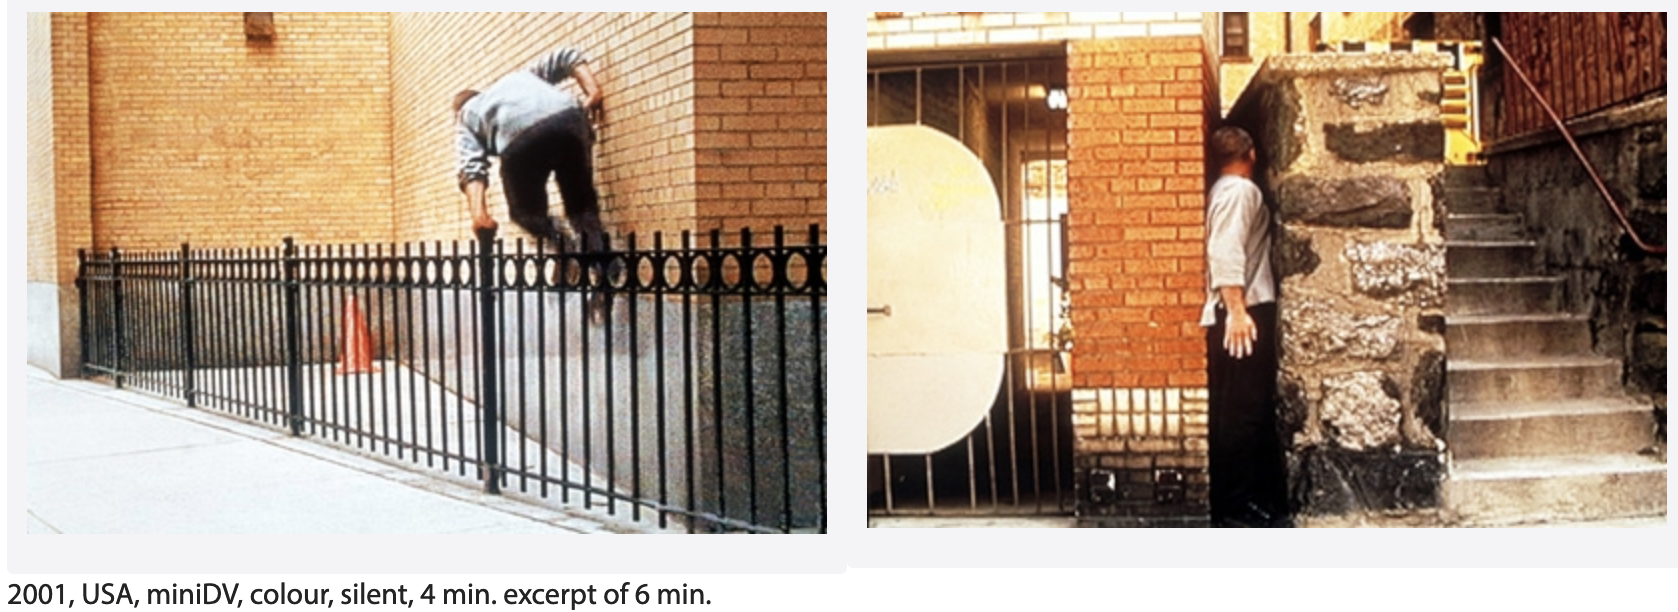 man jumping fences and fitting into narrow passages